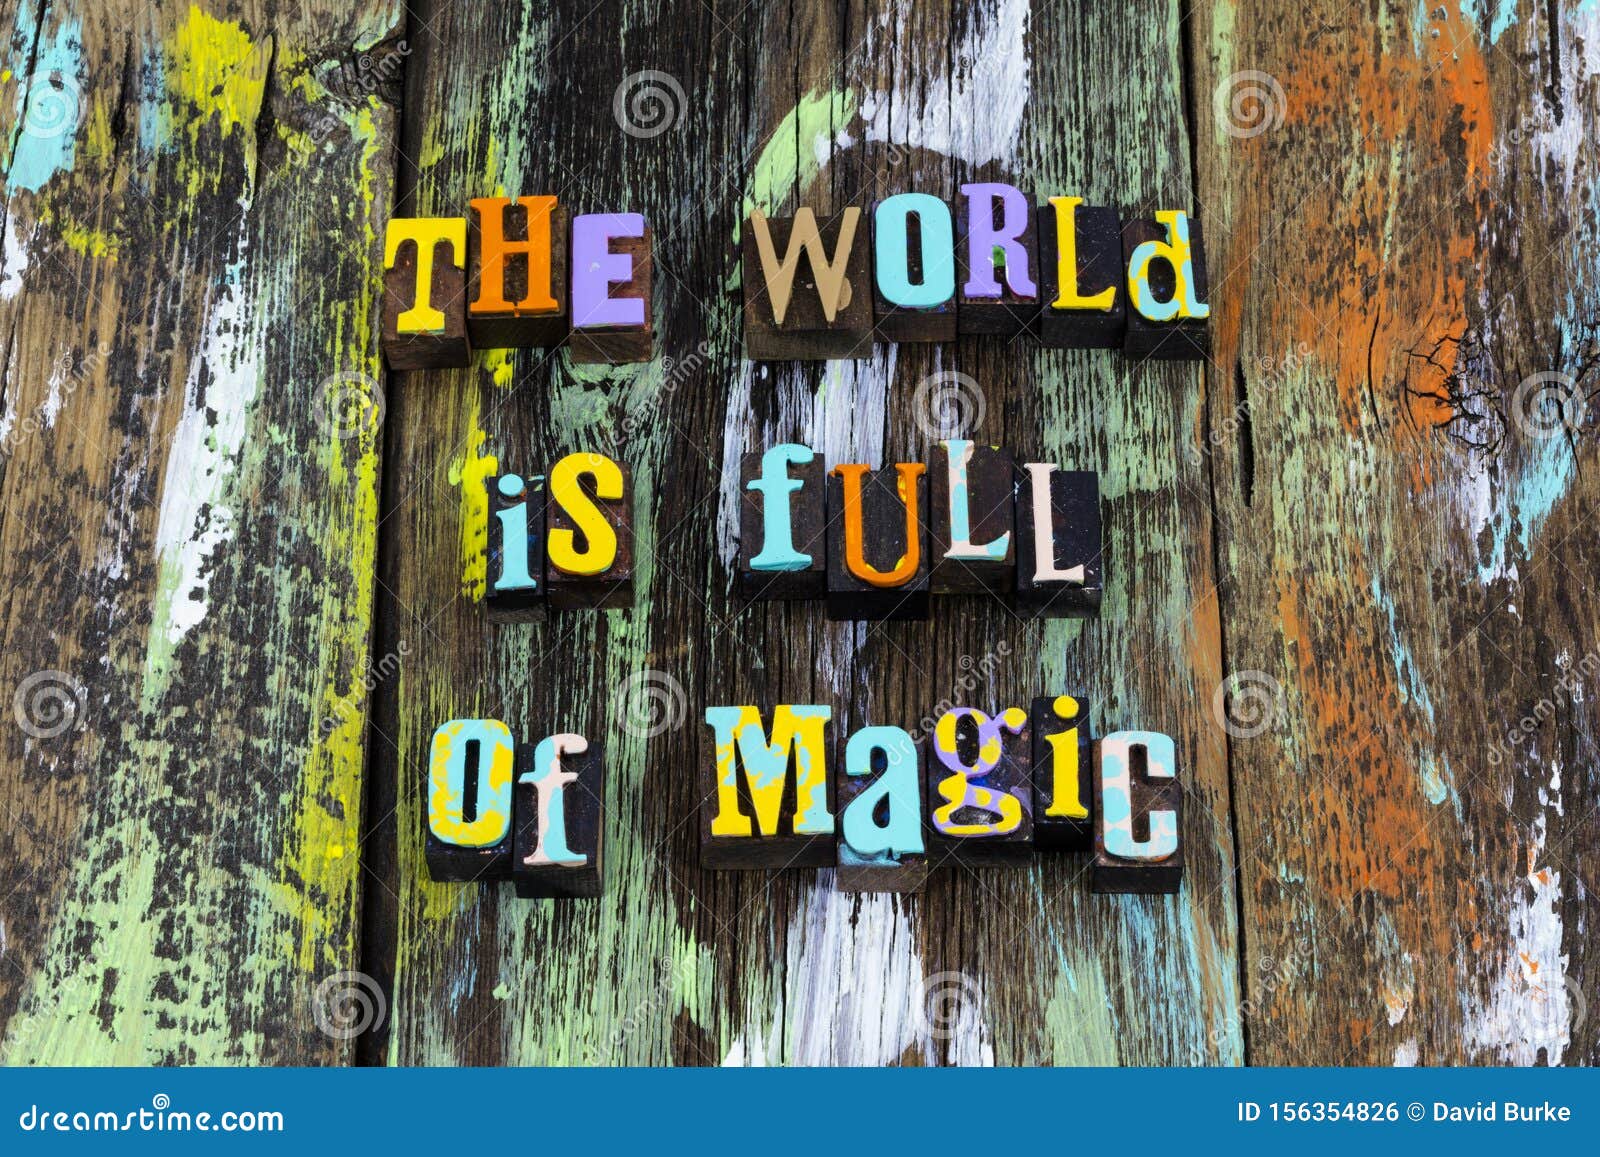 world magic people life dreamer curious curiosity dreaming lifestyle